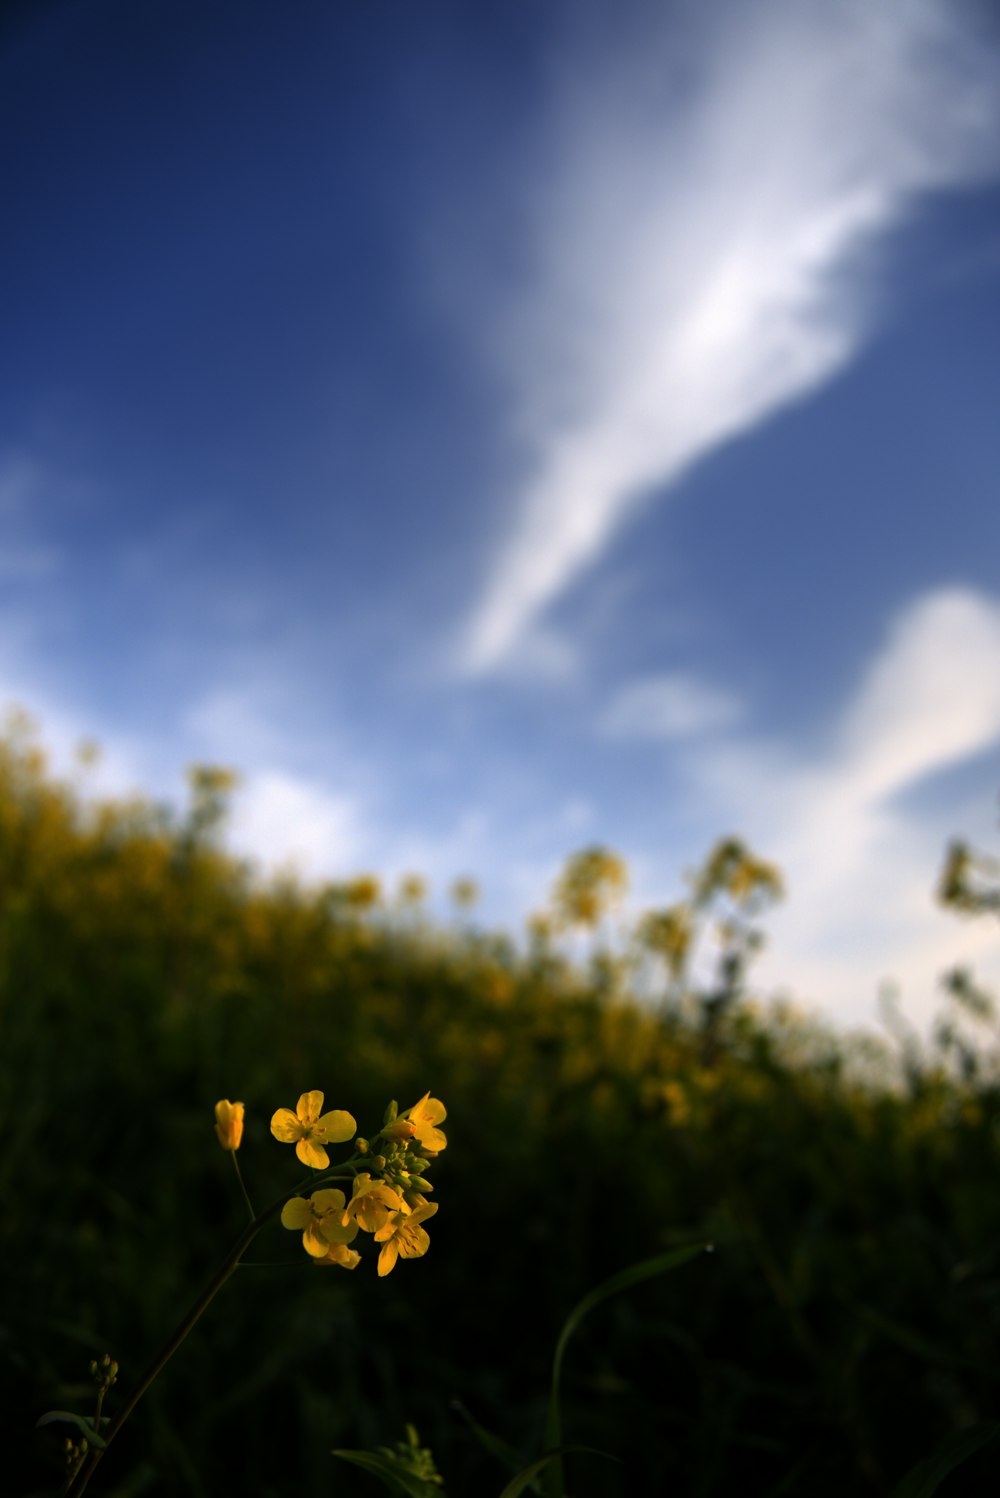 a small yellow flower in a grassy field